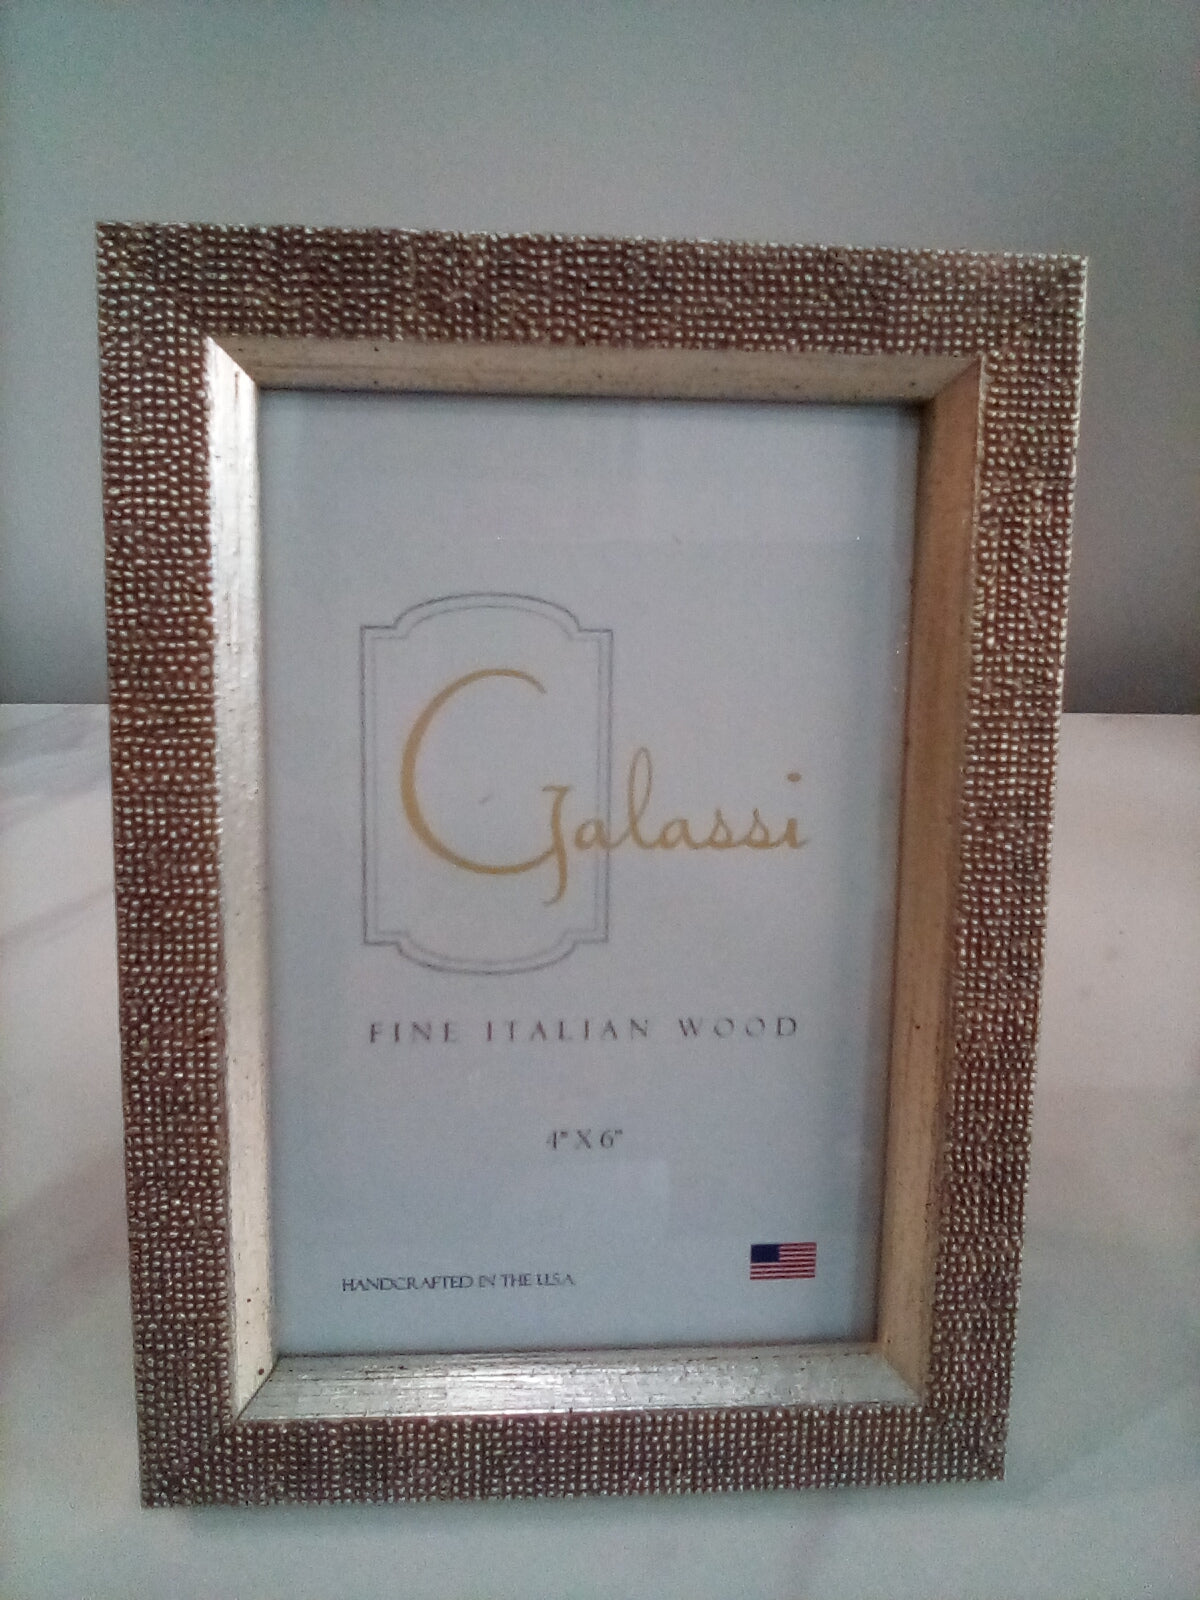 Galassi 4x6 Silver Picture Frame